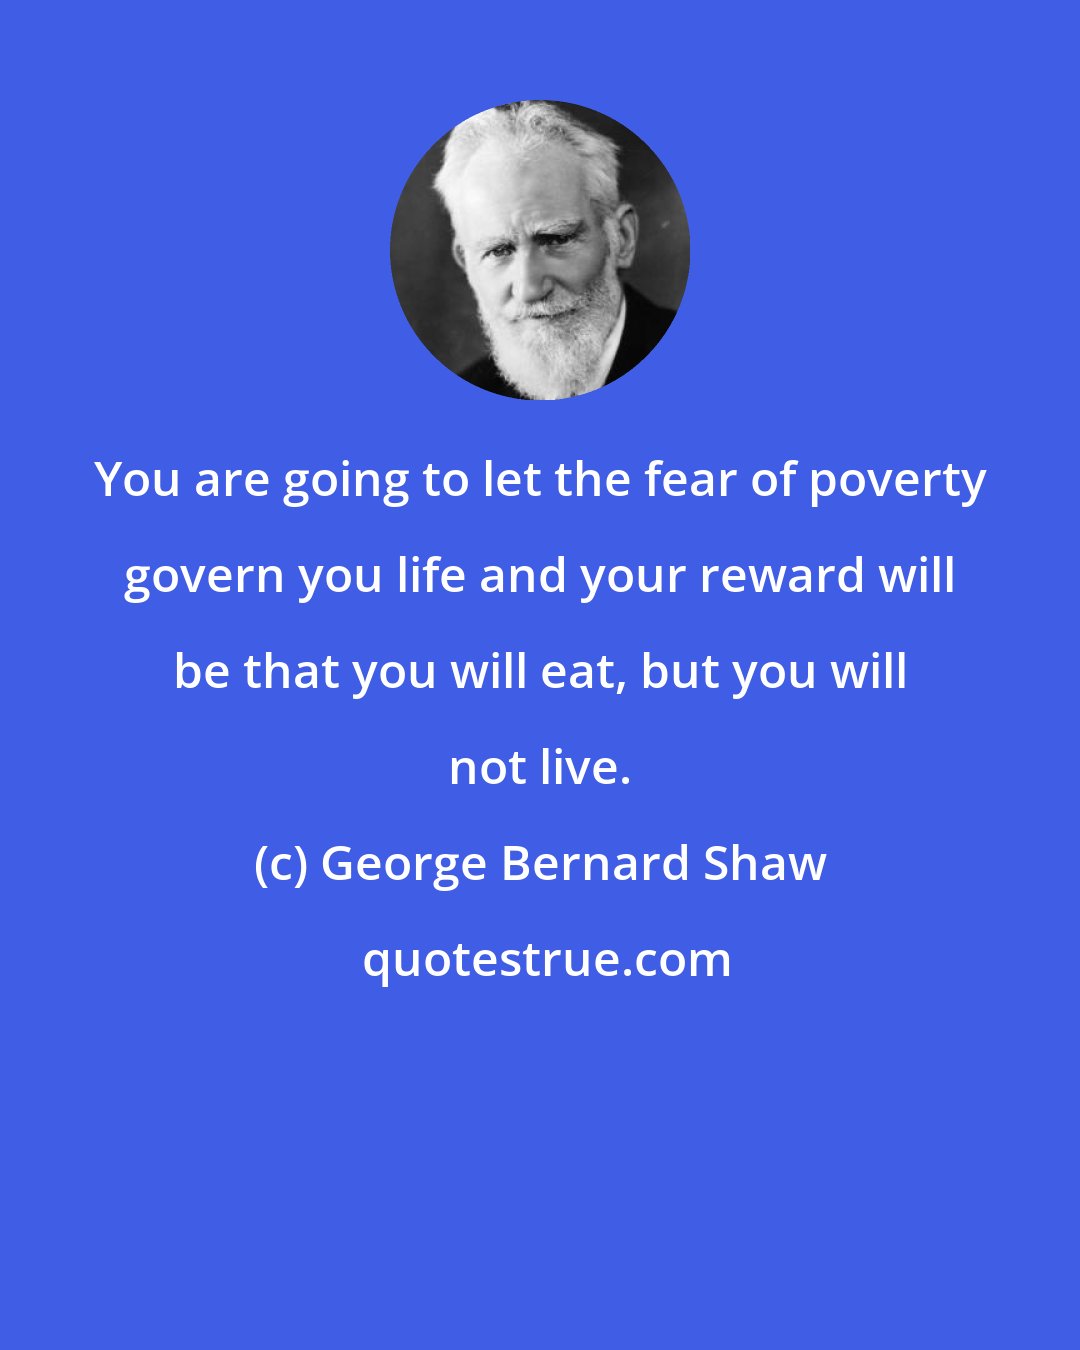 George Bernard Shaw: You are going to let the fear of poverty govern you life and your reward will be that you will eat, but you will not live.